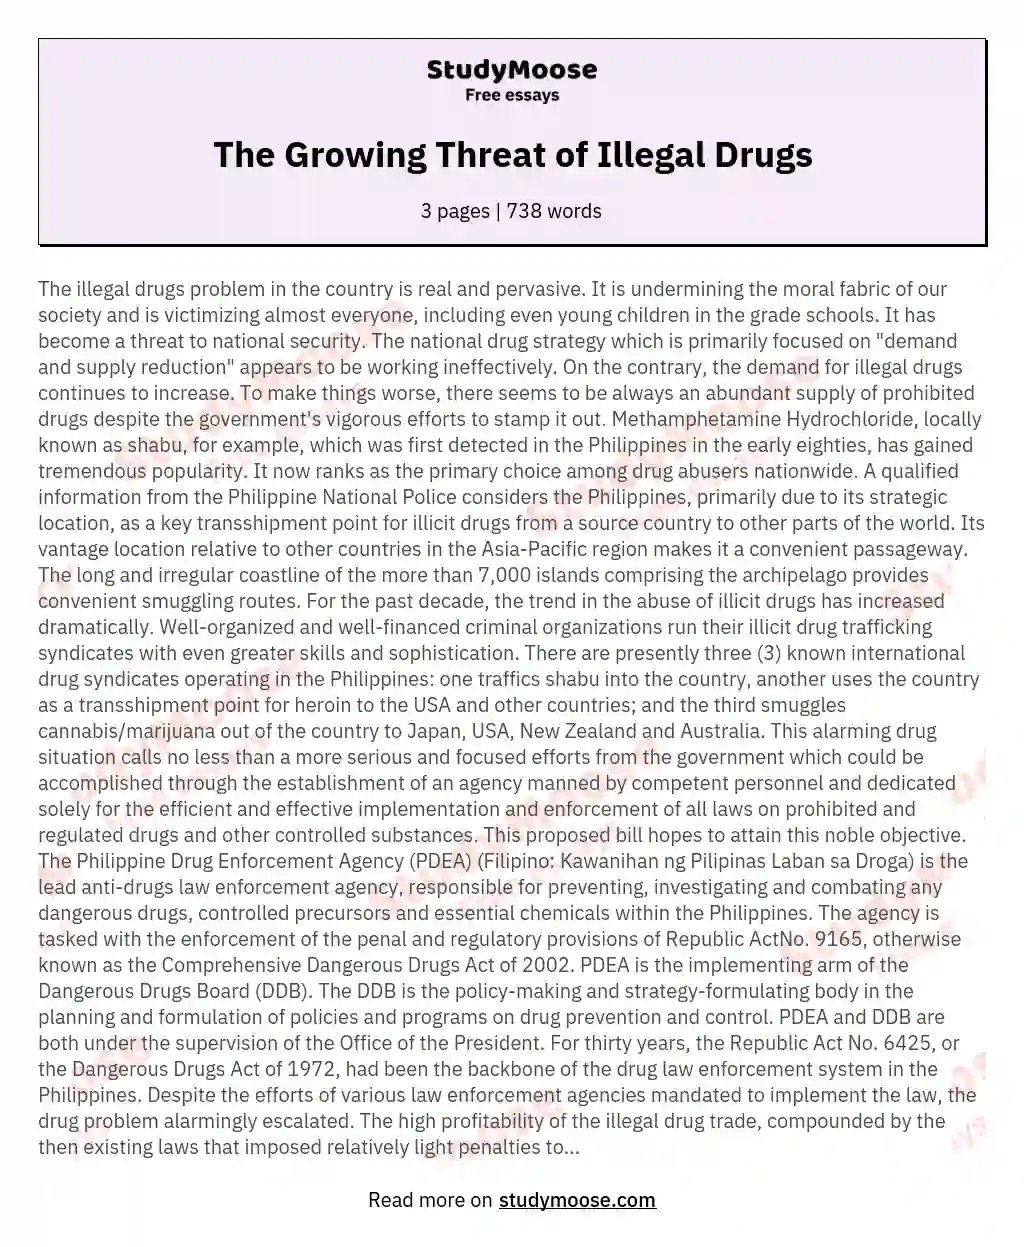 The Growing Threat of Illegal Drugs essay